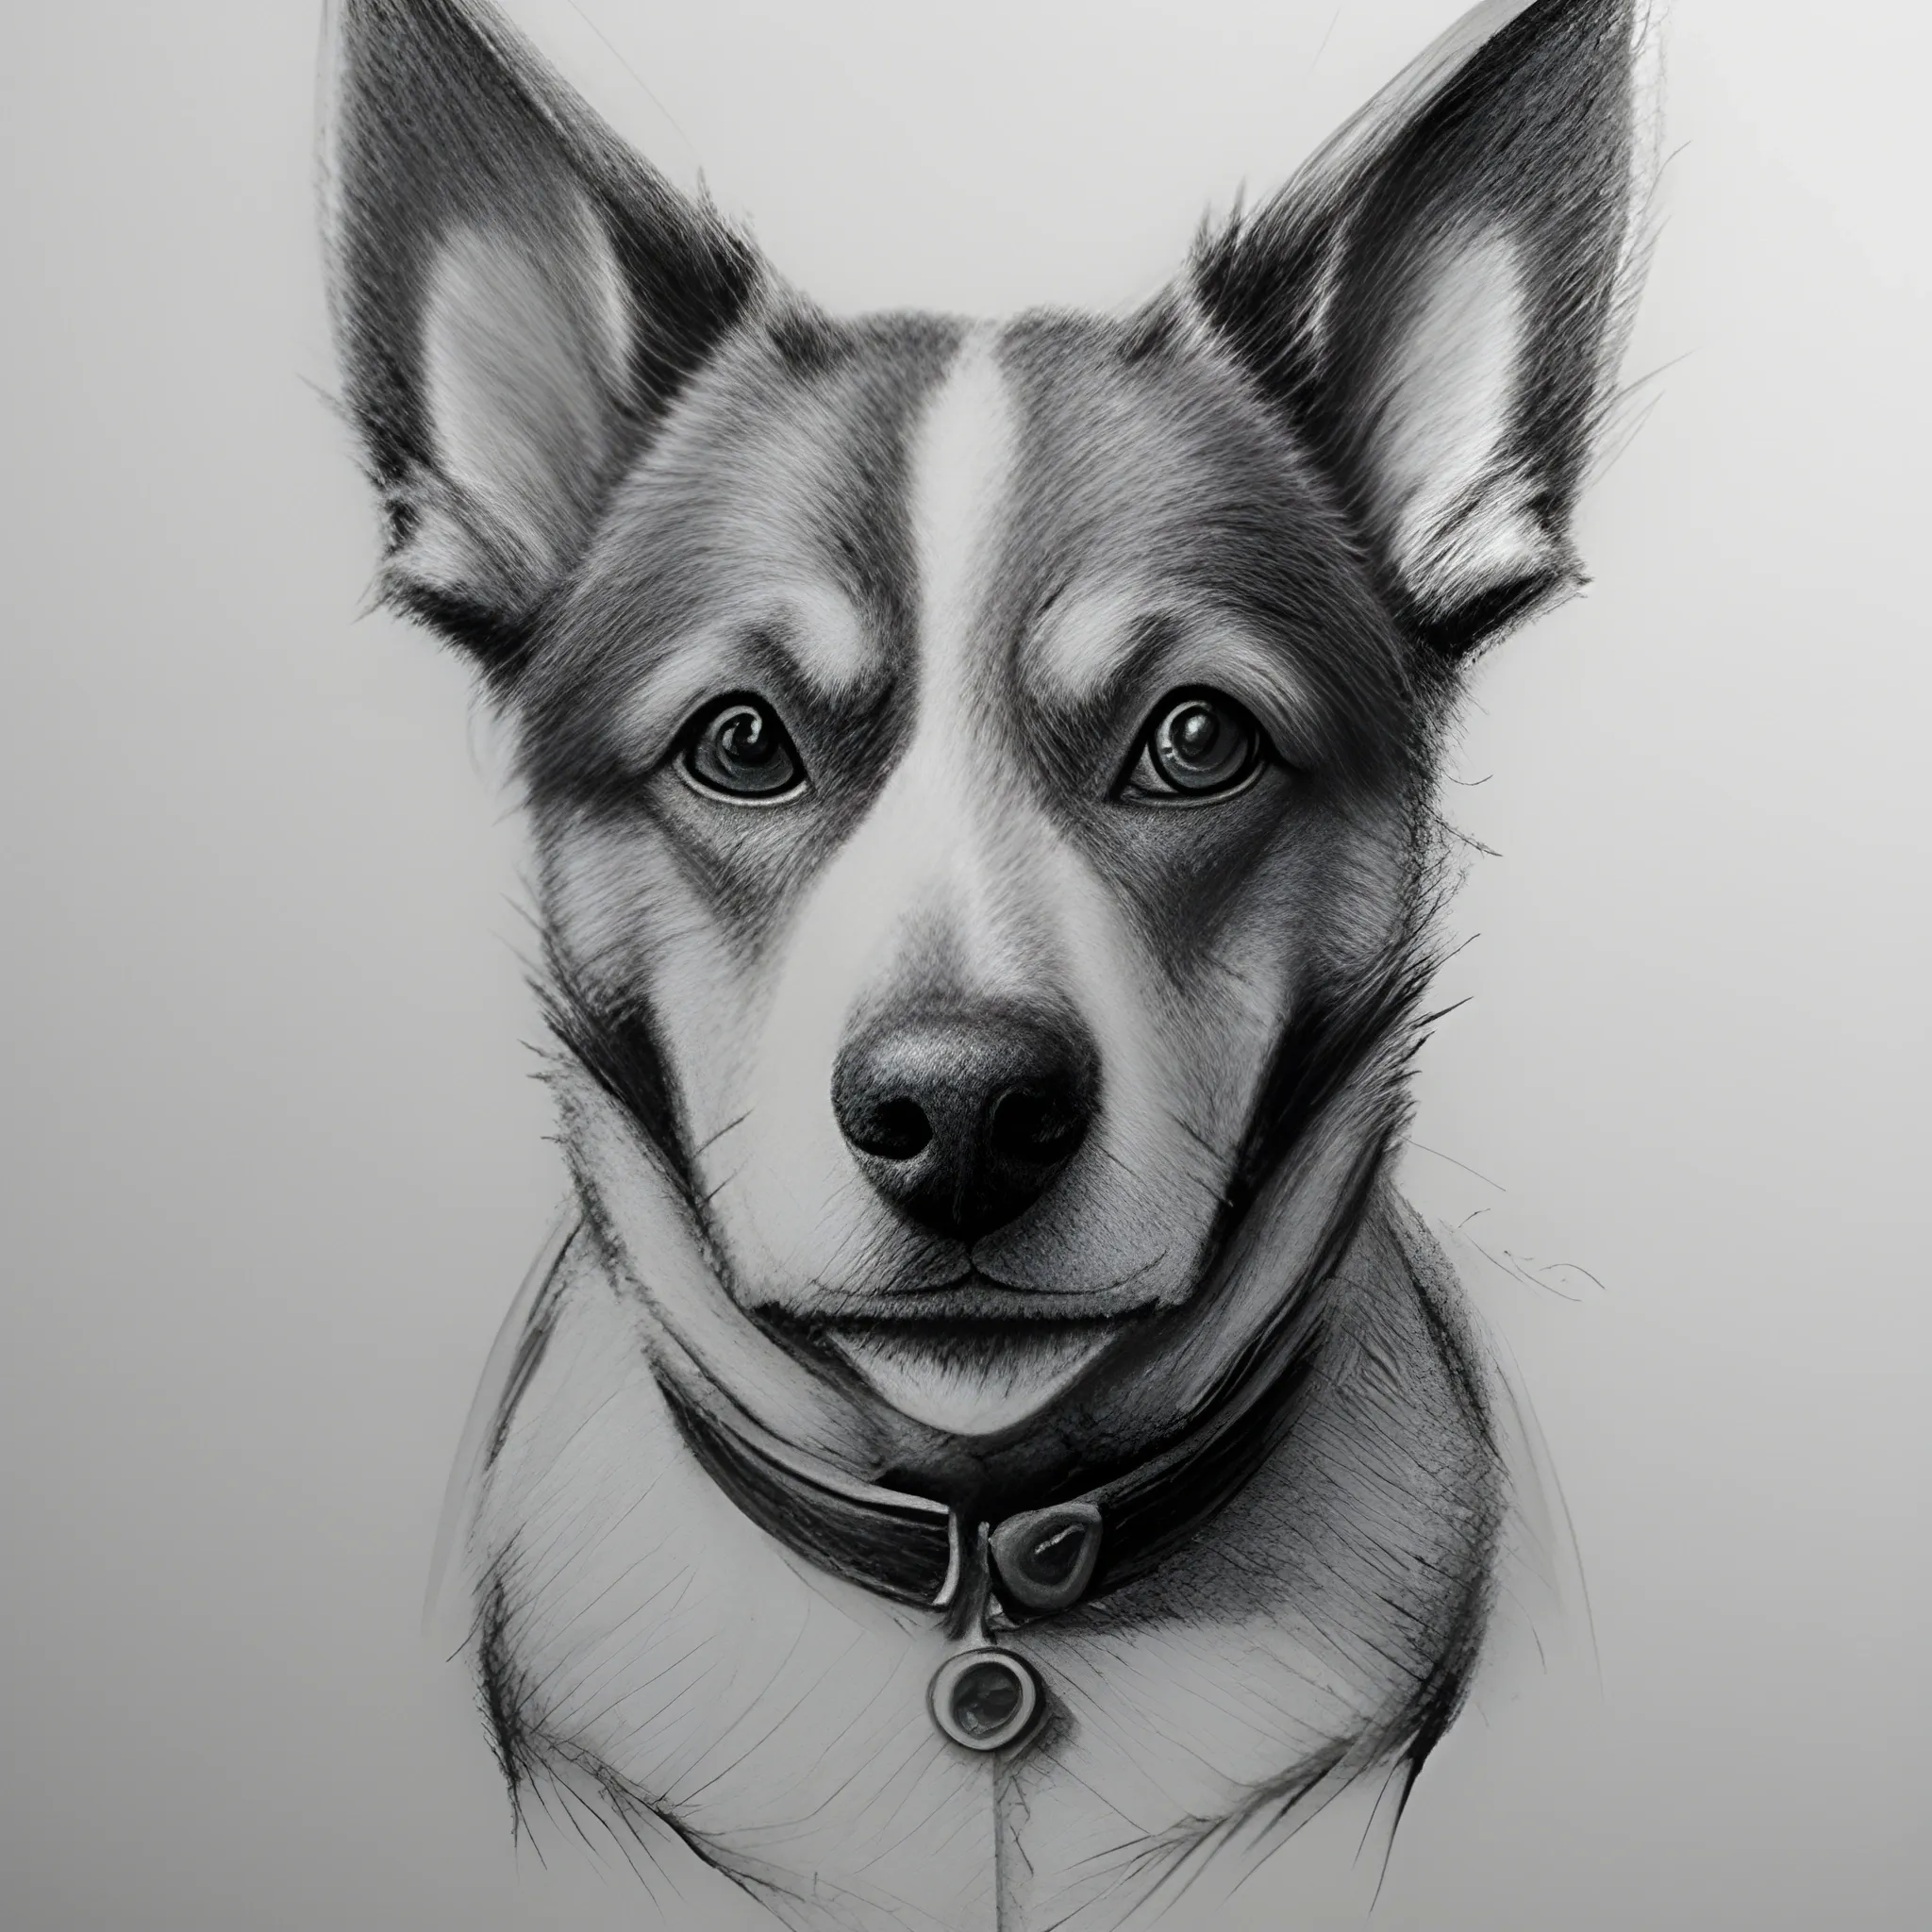 Dog Sketch Artwork Design.Dog sketch - PhotoArt - Drawings & Illustration,  Animals, Birds, & Fish, Dogs & Puppies, Other Dogs & Puppies - ArtPal